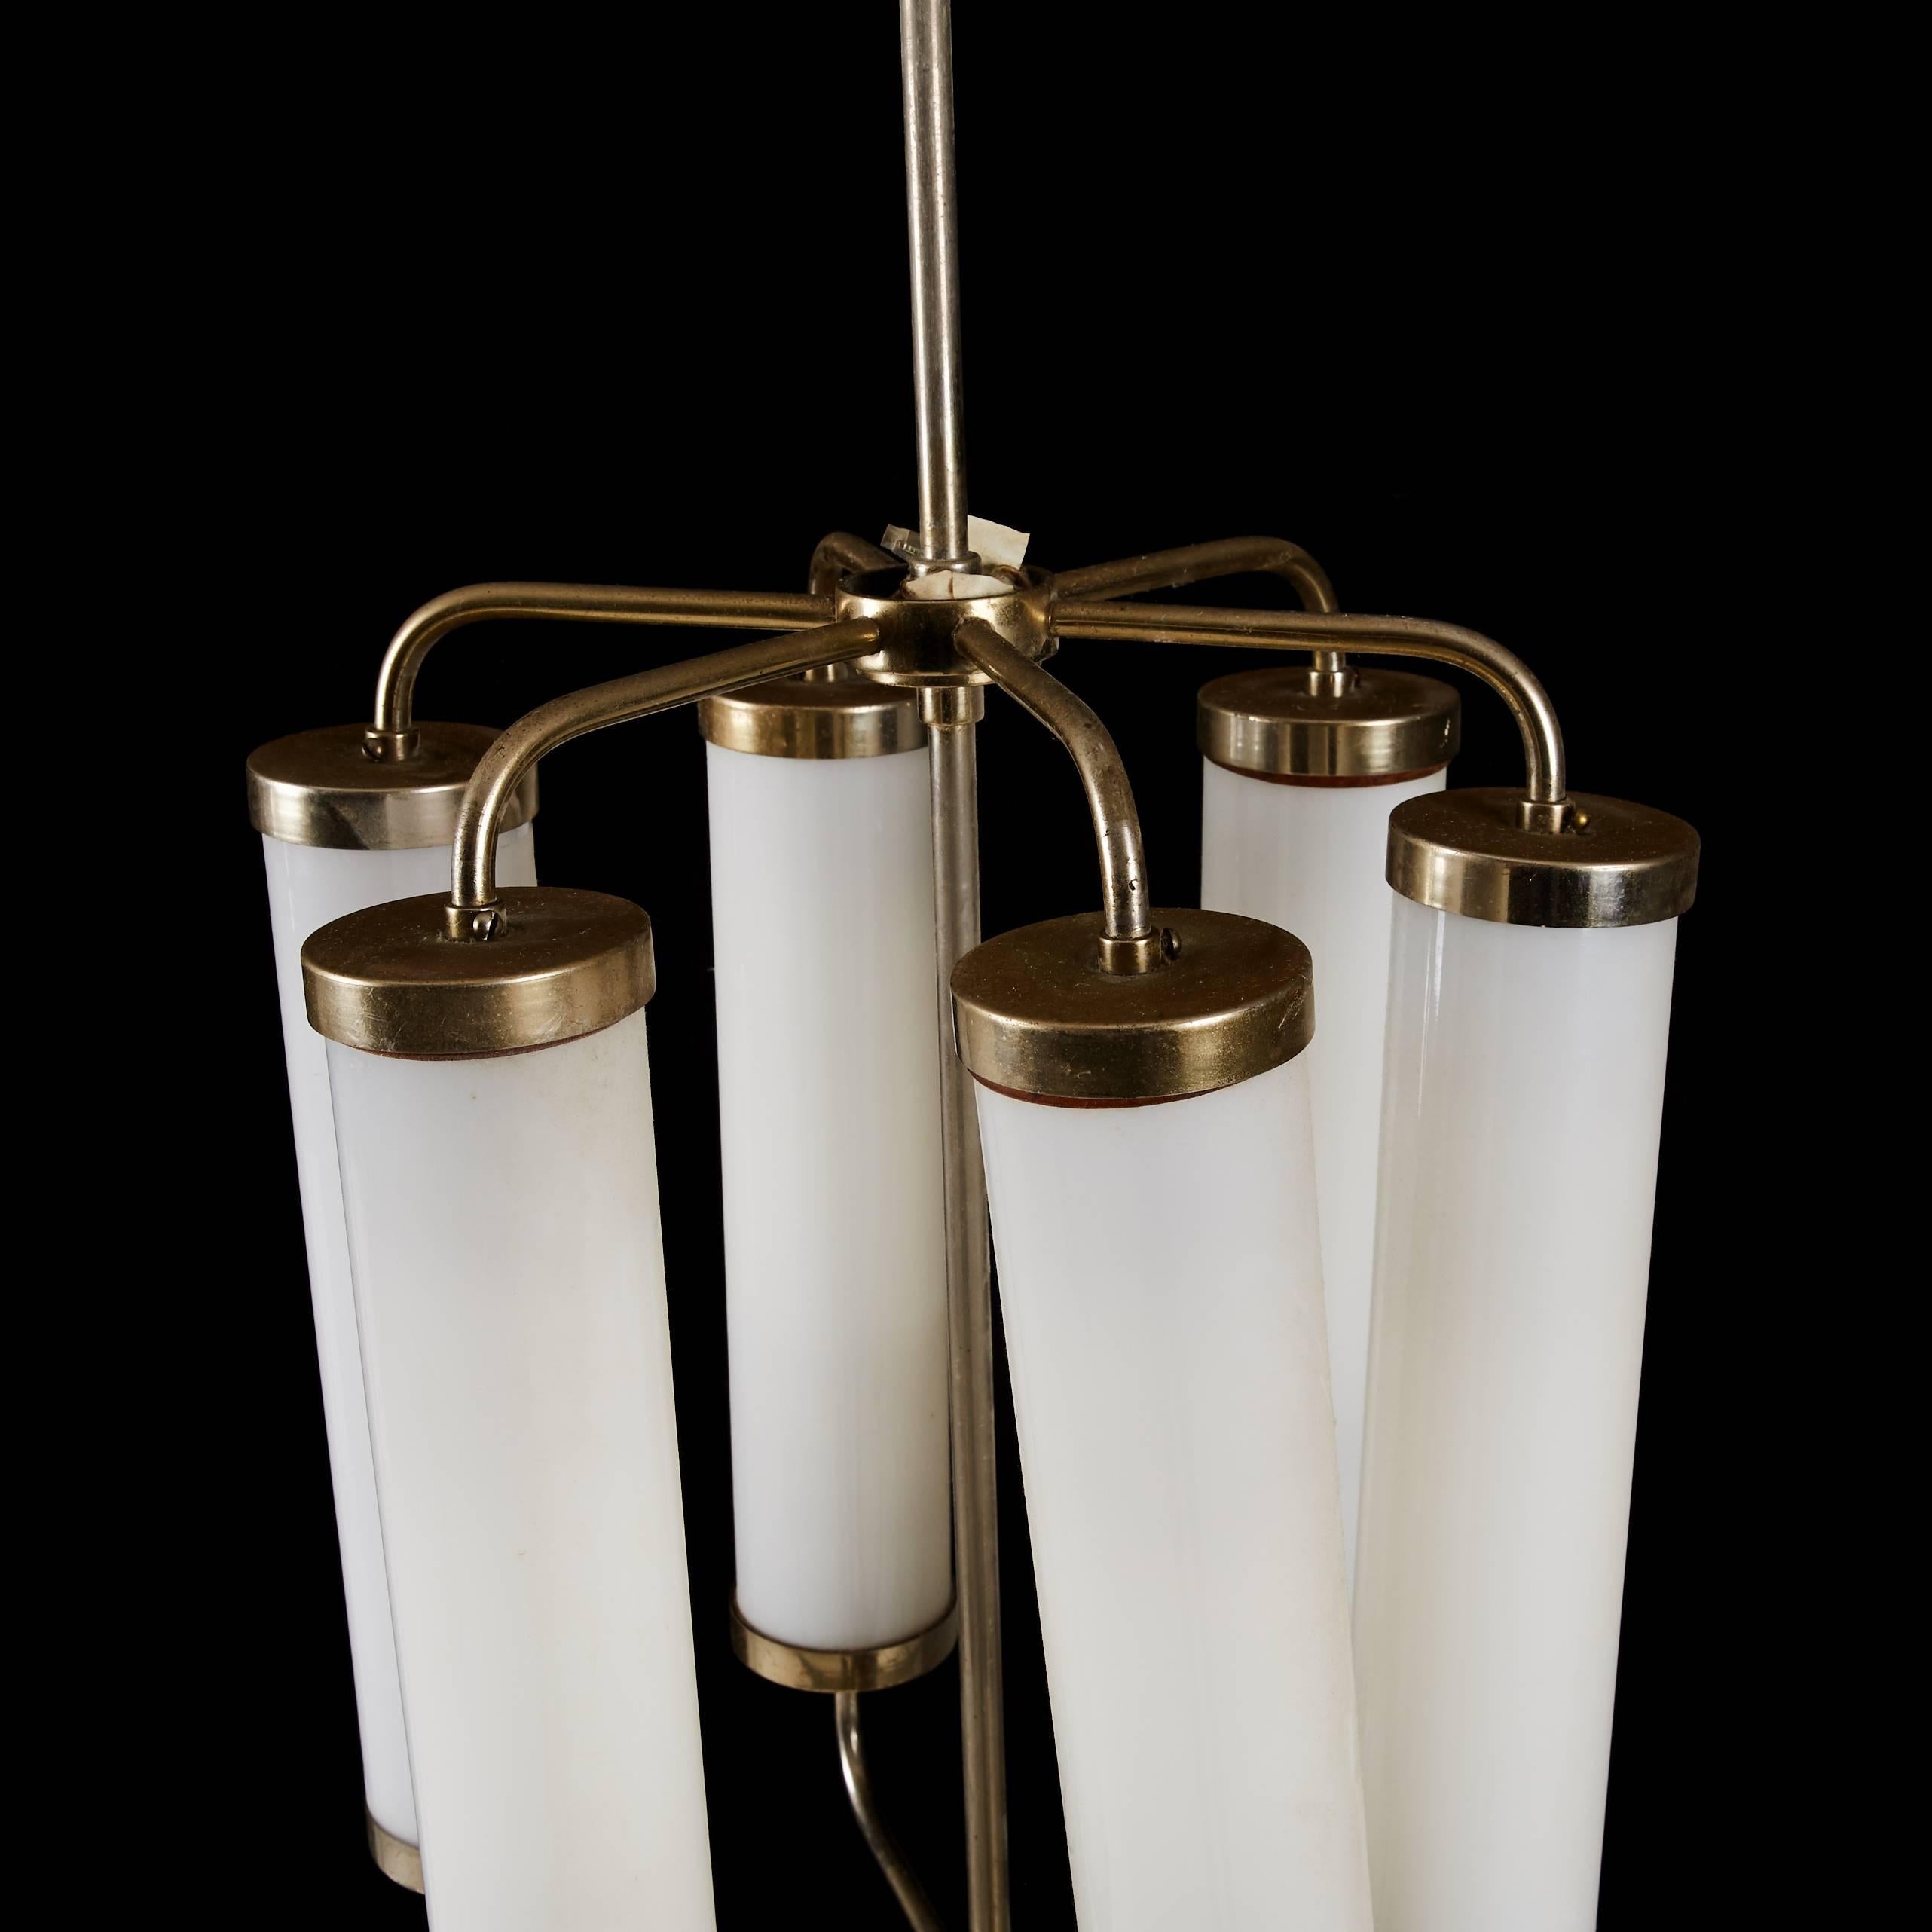 Beautiful simple and strict brass and steel construction chromed with six double coated glass cylinders. Made in Denmark in the late 1940s.